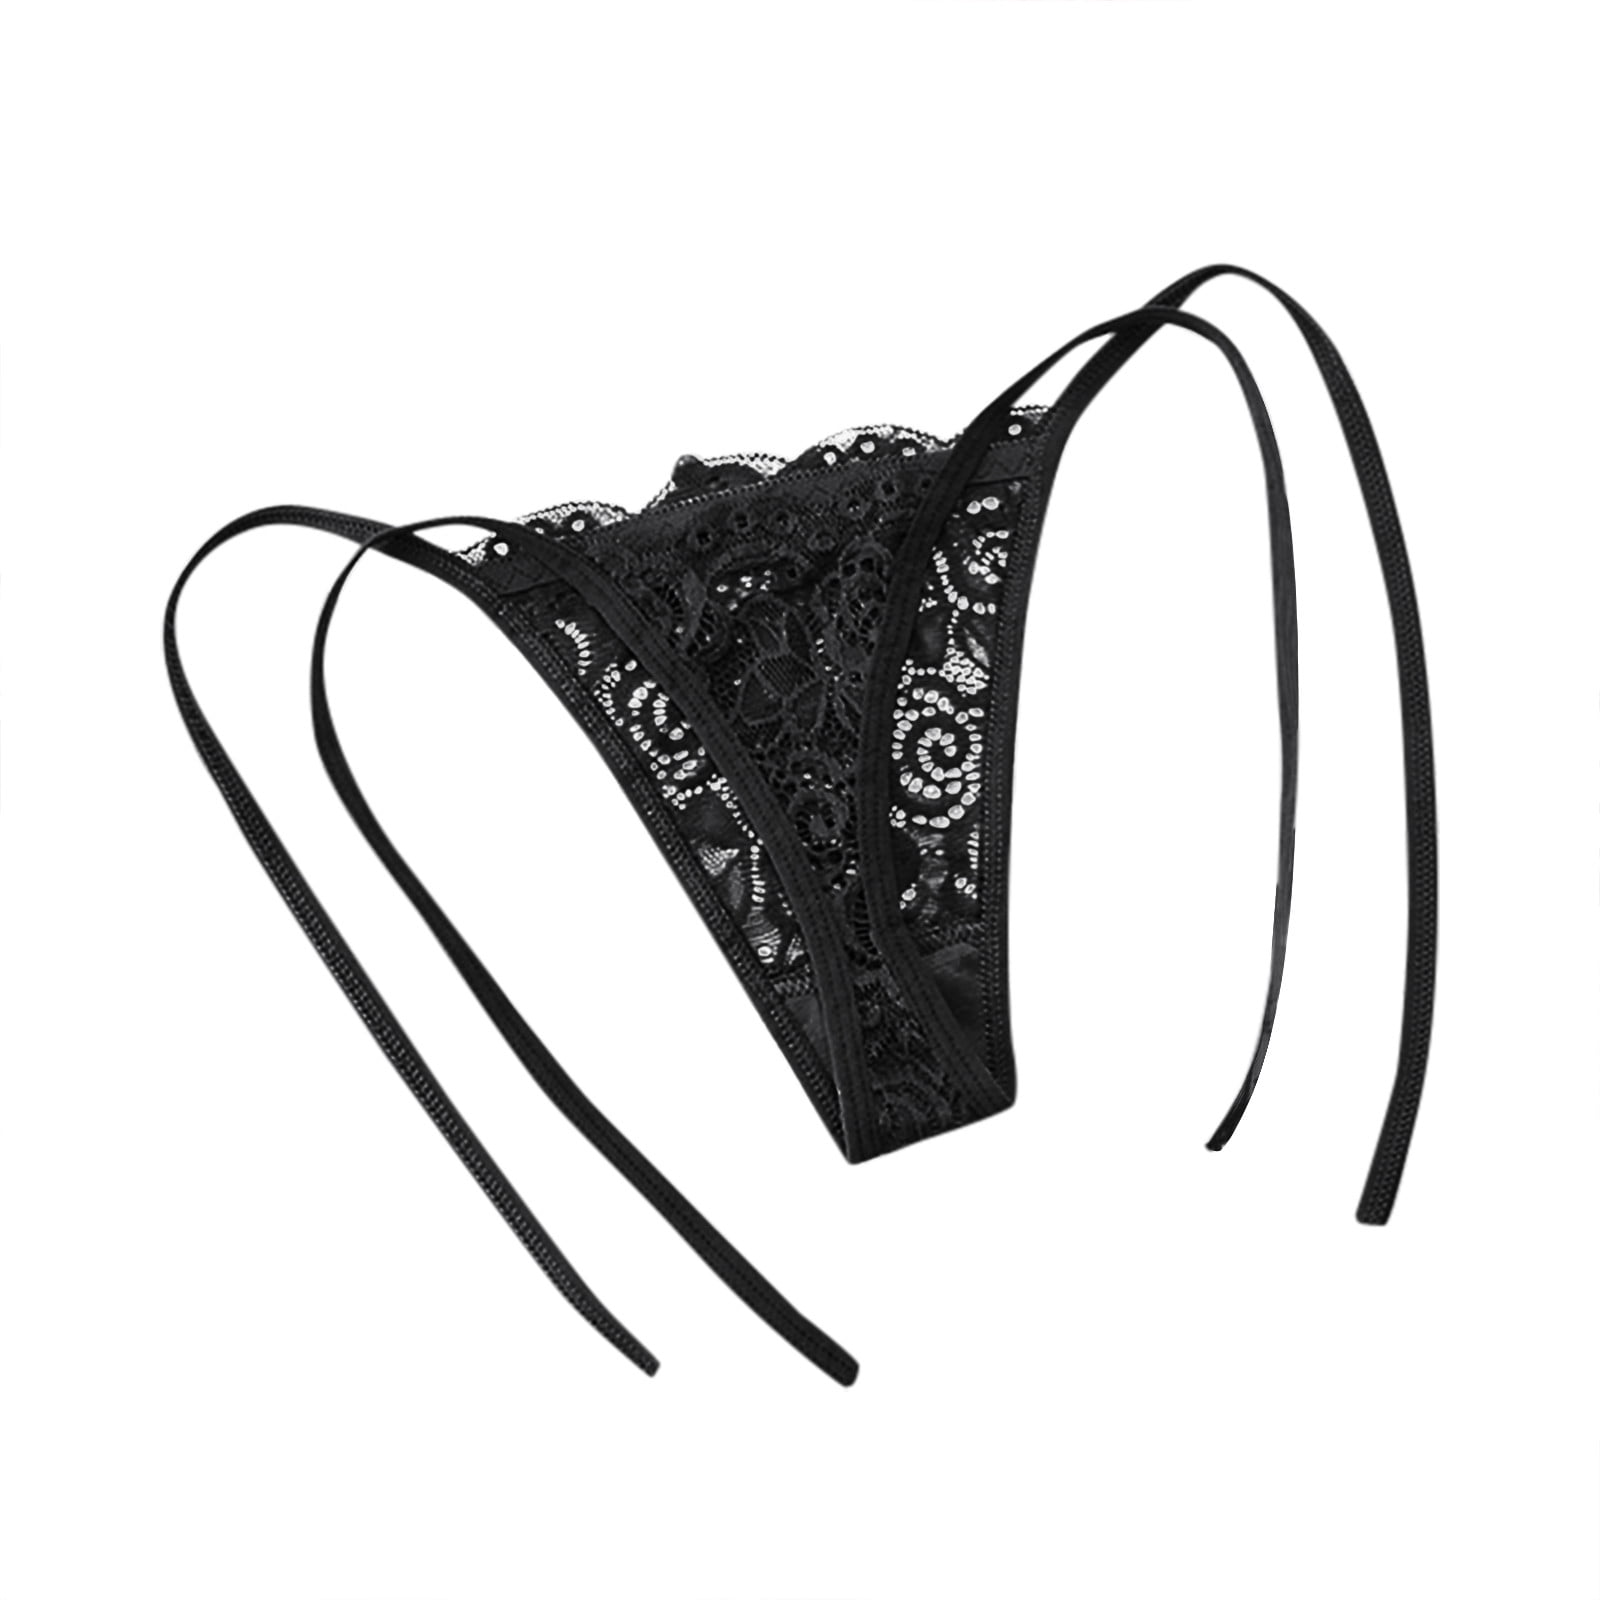 Qcmgmg Ladies Underwear Clearance Full Coverage Sexy Low Waisted G String  Thong for Women Plus Size Stretch Lace No Show Strappy Ladies Underwear